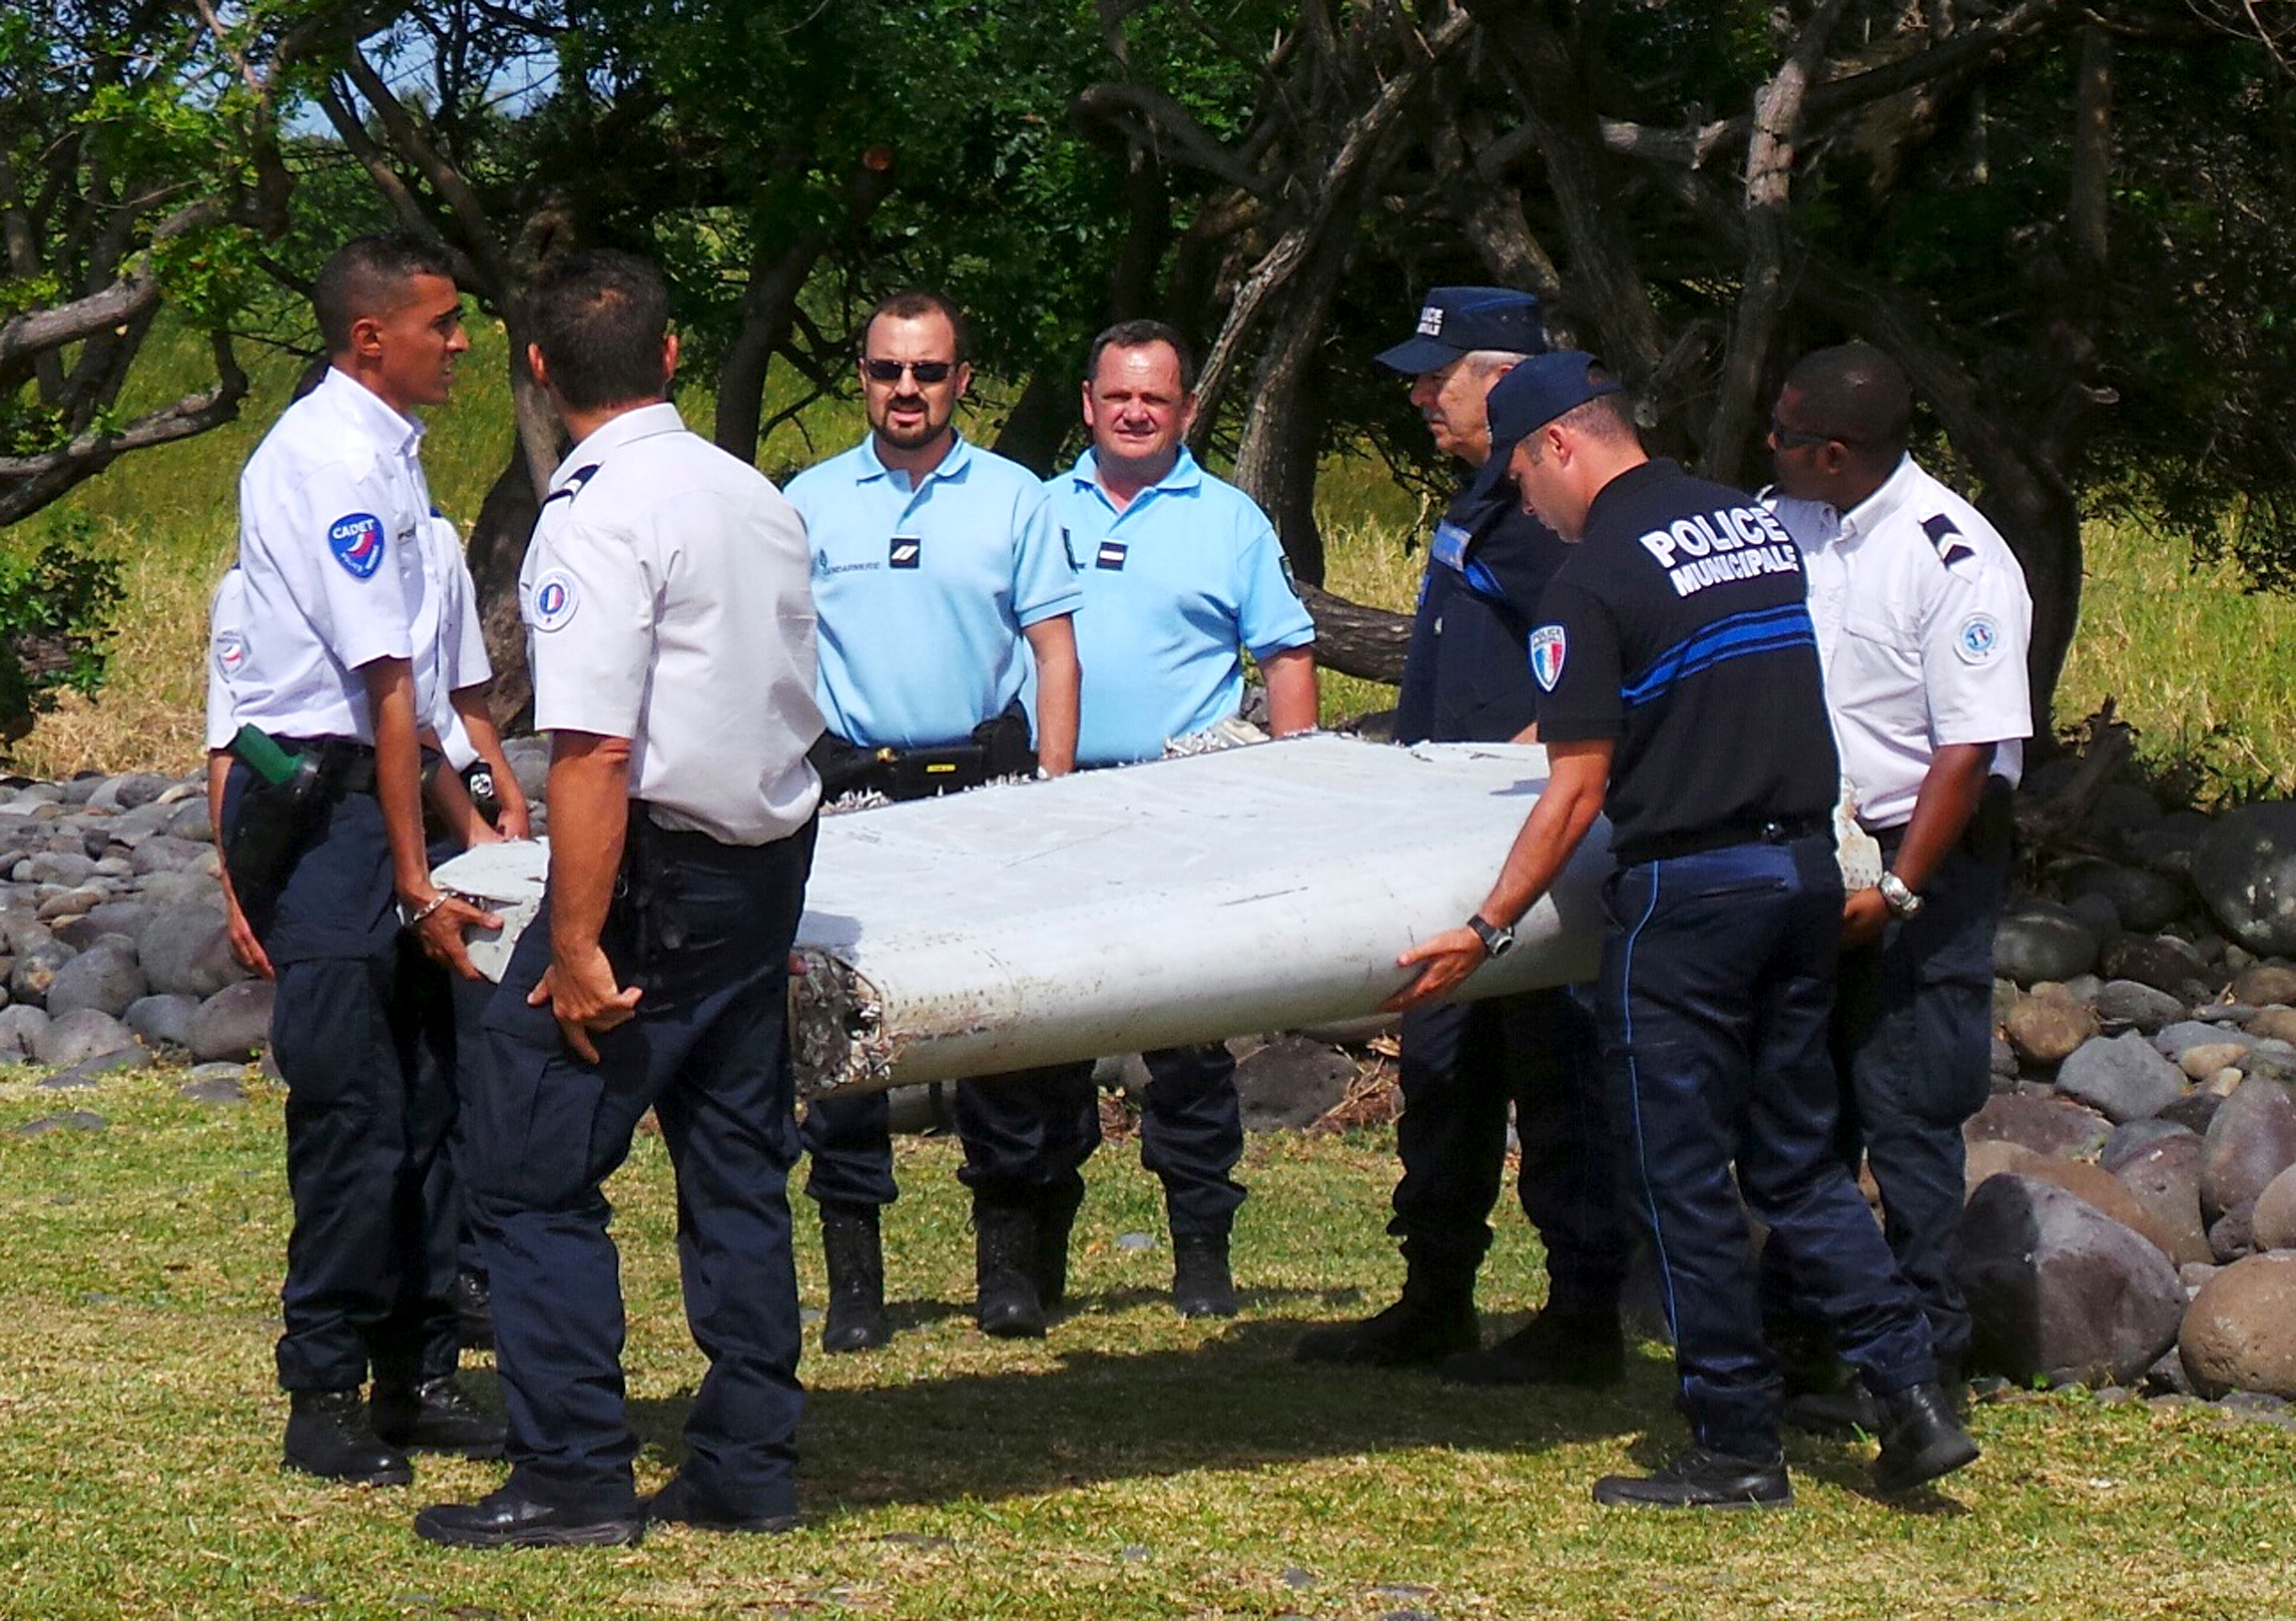 PHOTO: French gendarmes and police carry a large piece of plane debris which was found on the beach in Saint-Andre, on the French Indian Ocean island of La Reunion, July 29, 2015.